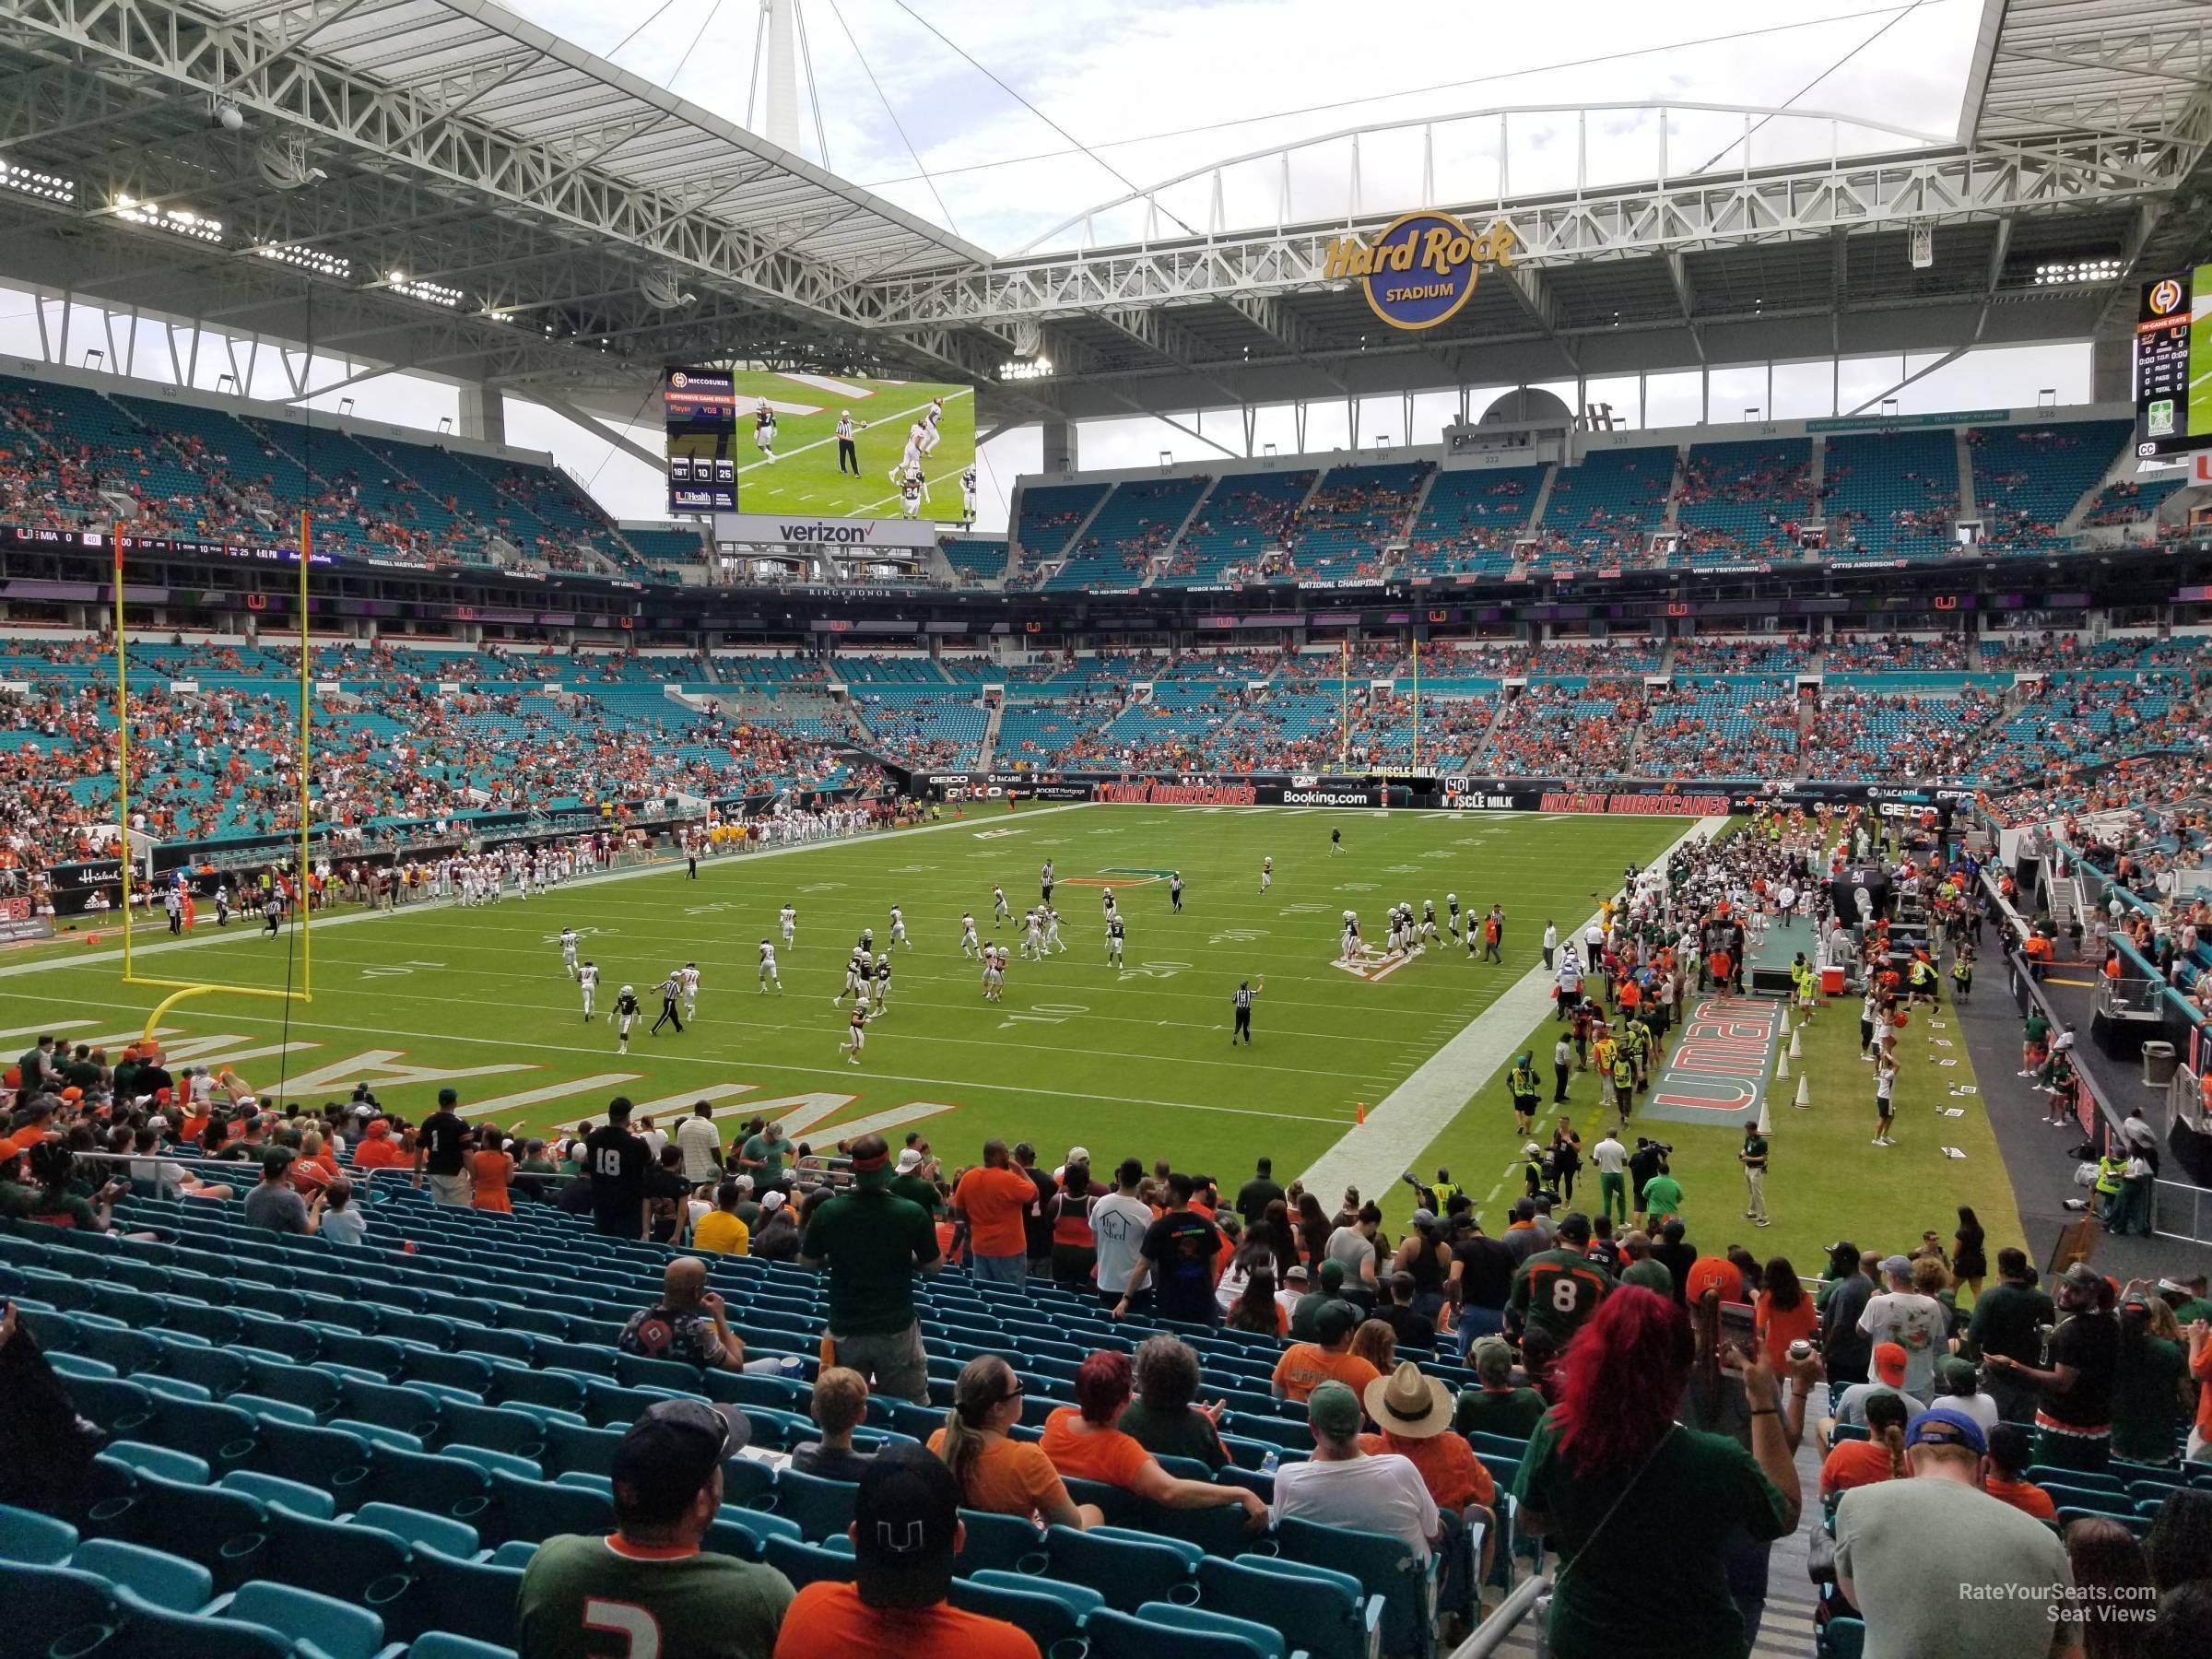 section 101, row 28 seat view  for football - hard rock stadium